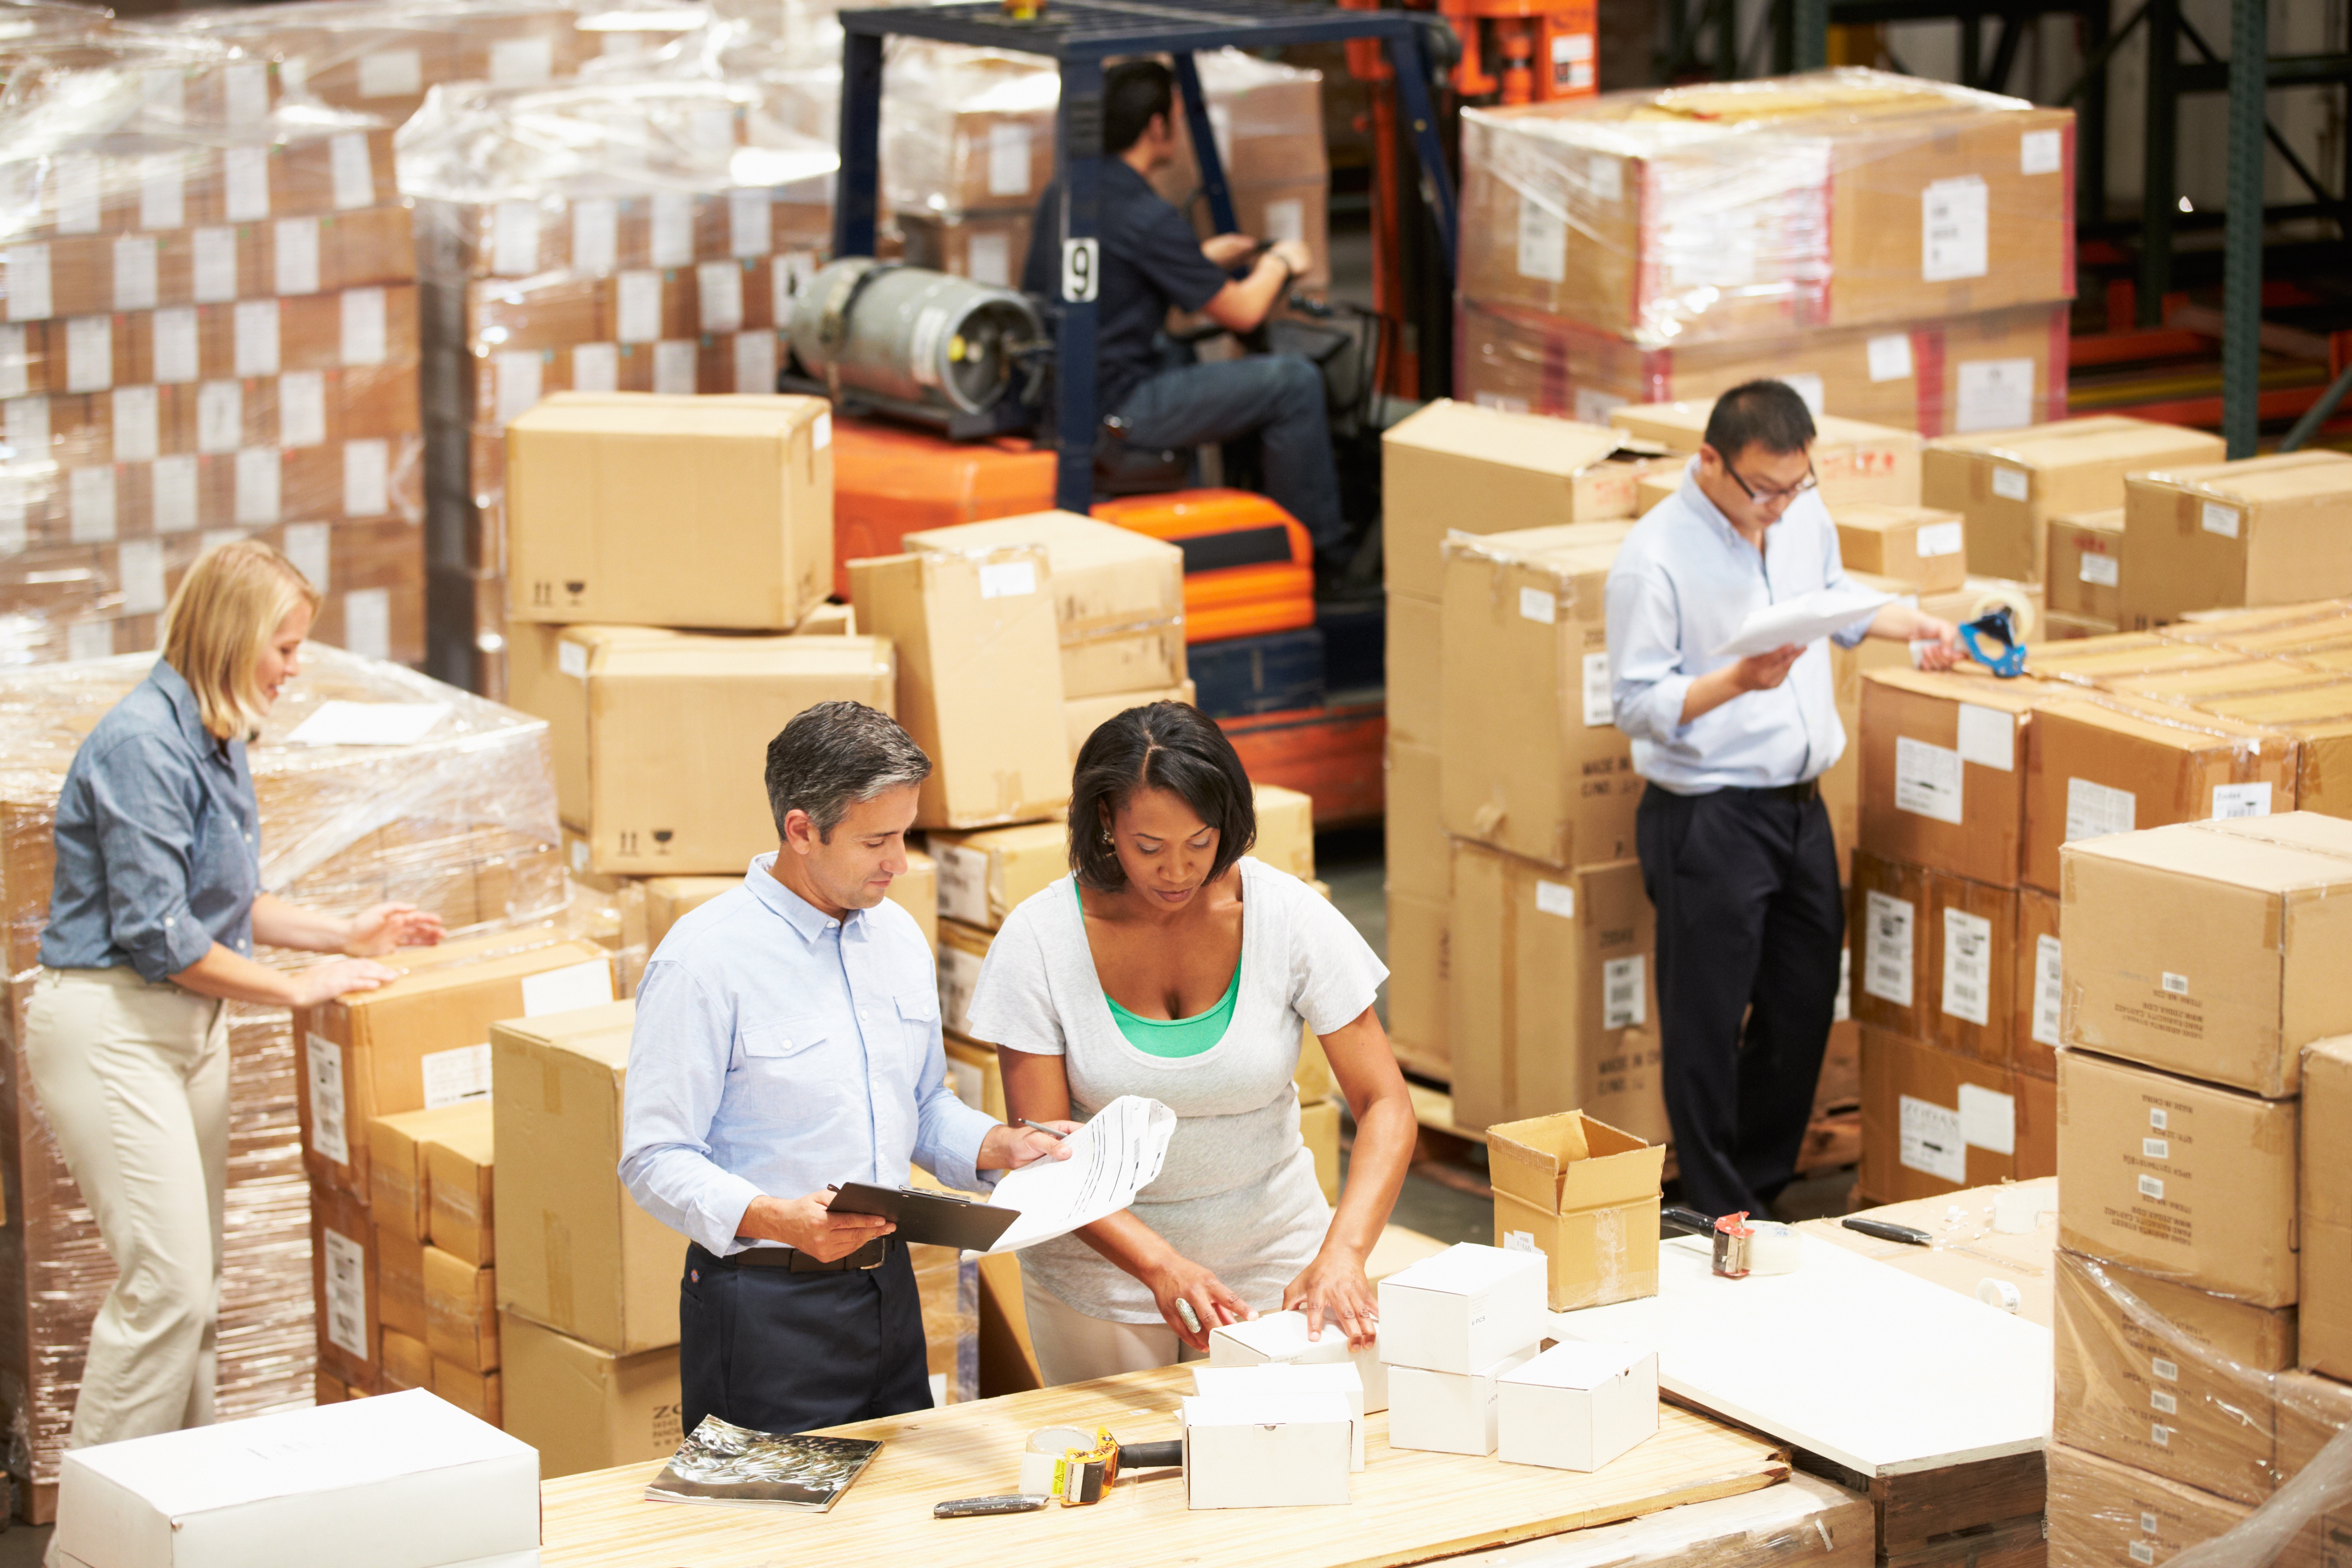 How to Solve the Challenge of Getting the Right Inventory Stock in the Right Place